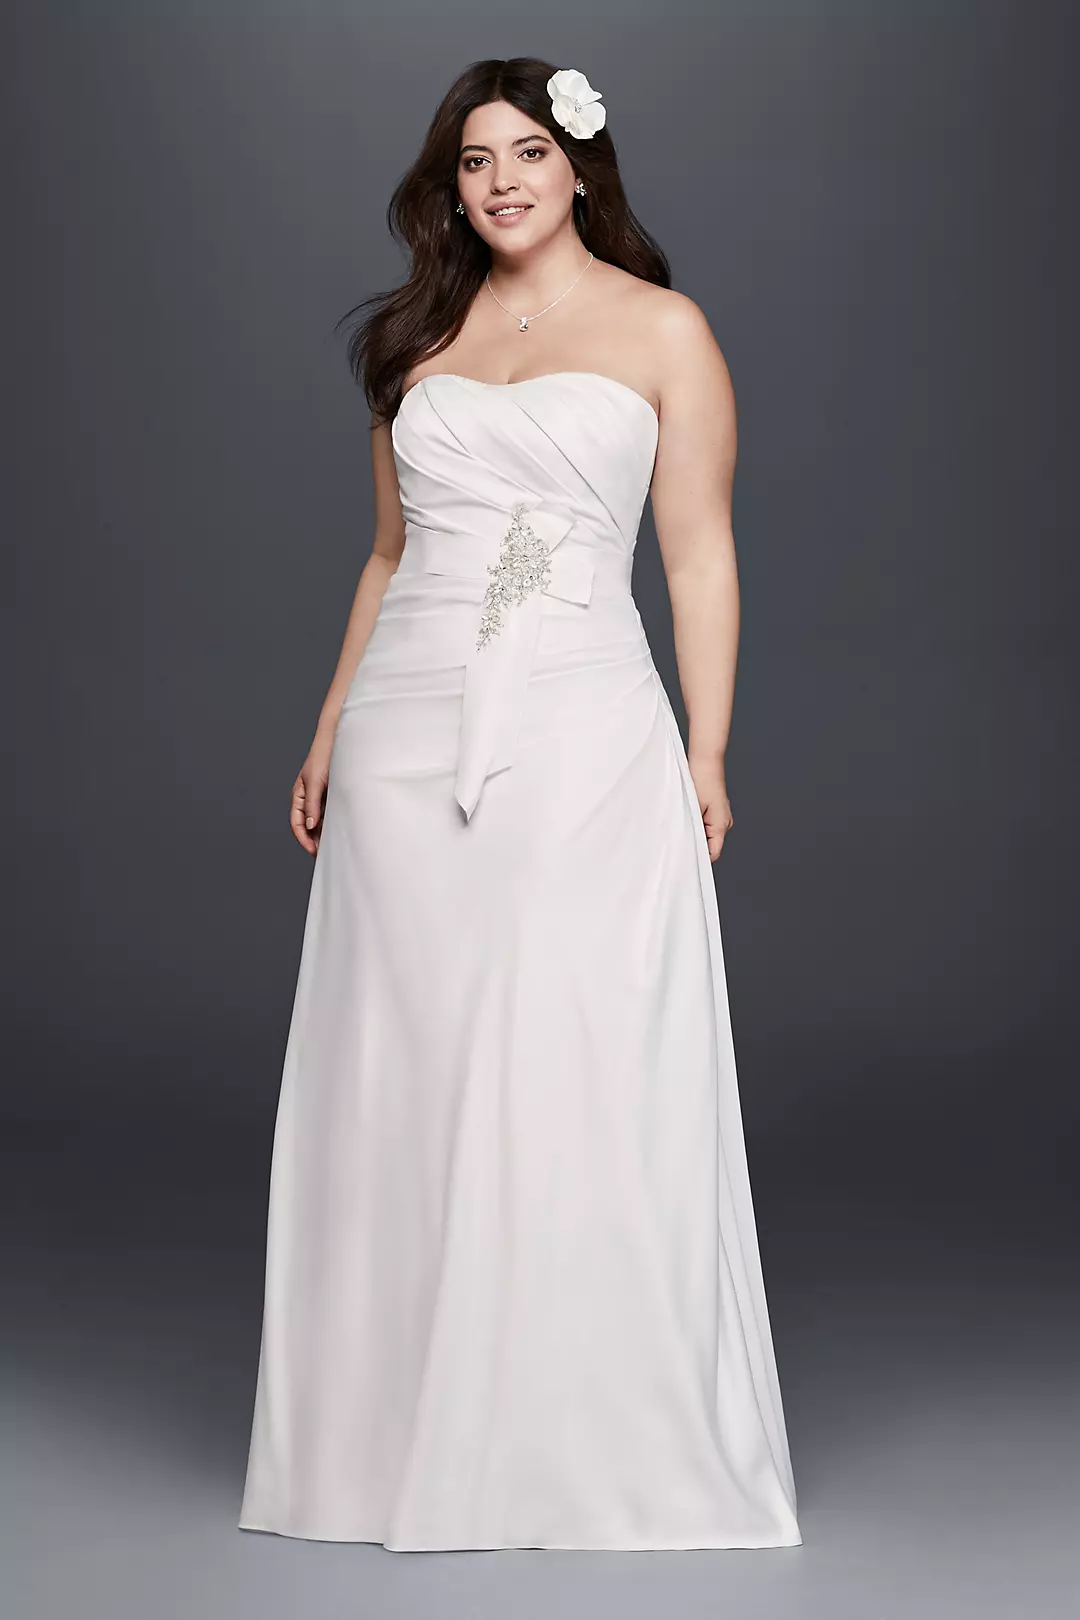 Plus Size Ruched Wedding Dress with Bow at Hip Image